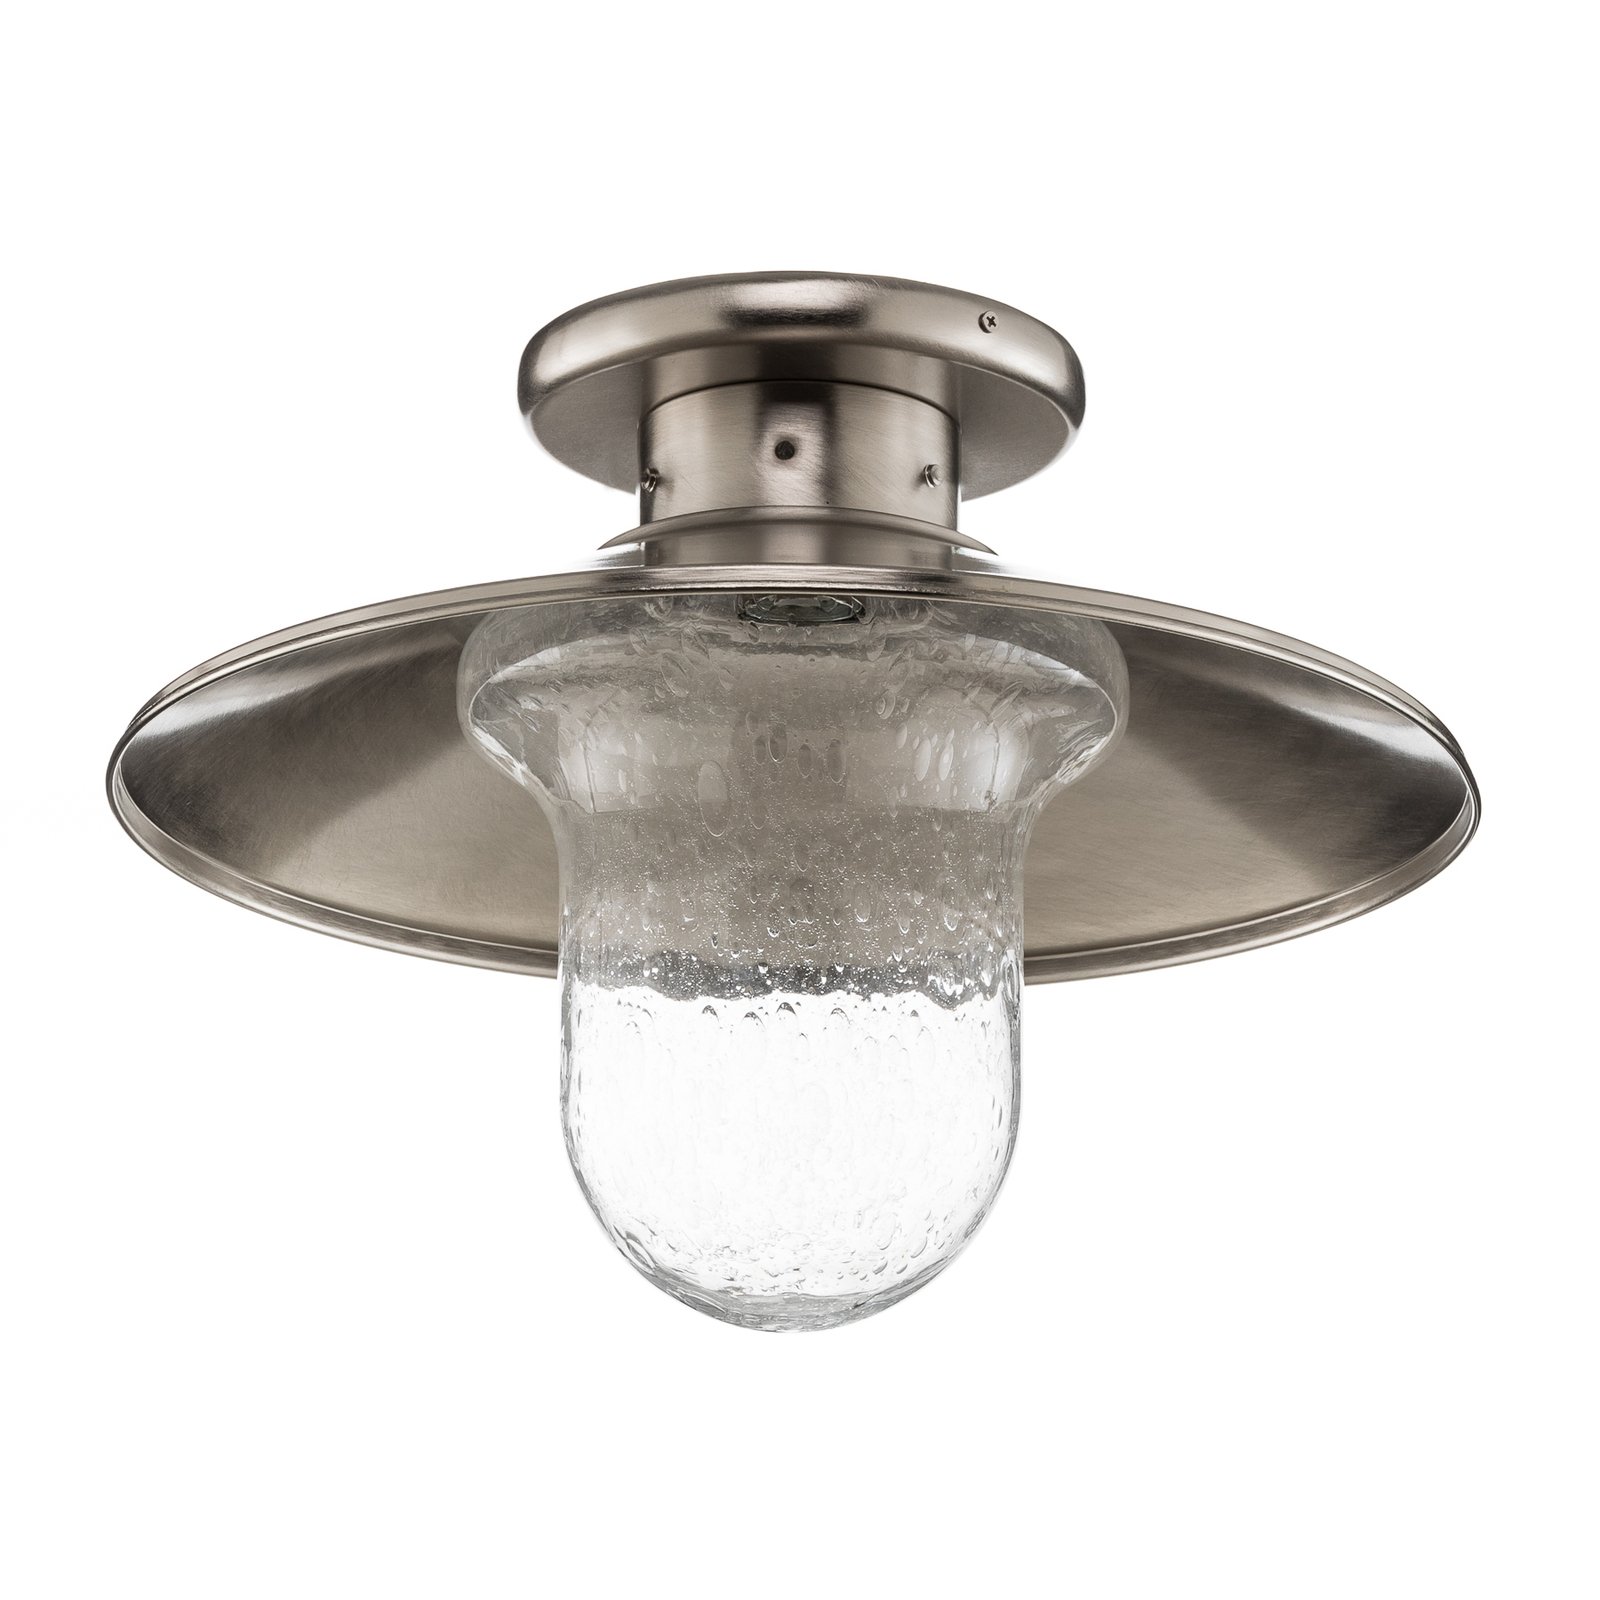 Maestrale ceiling light, clear glass lampshades